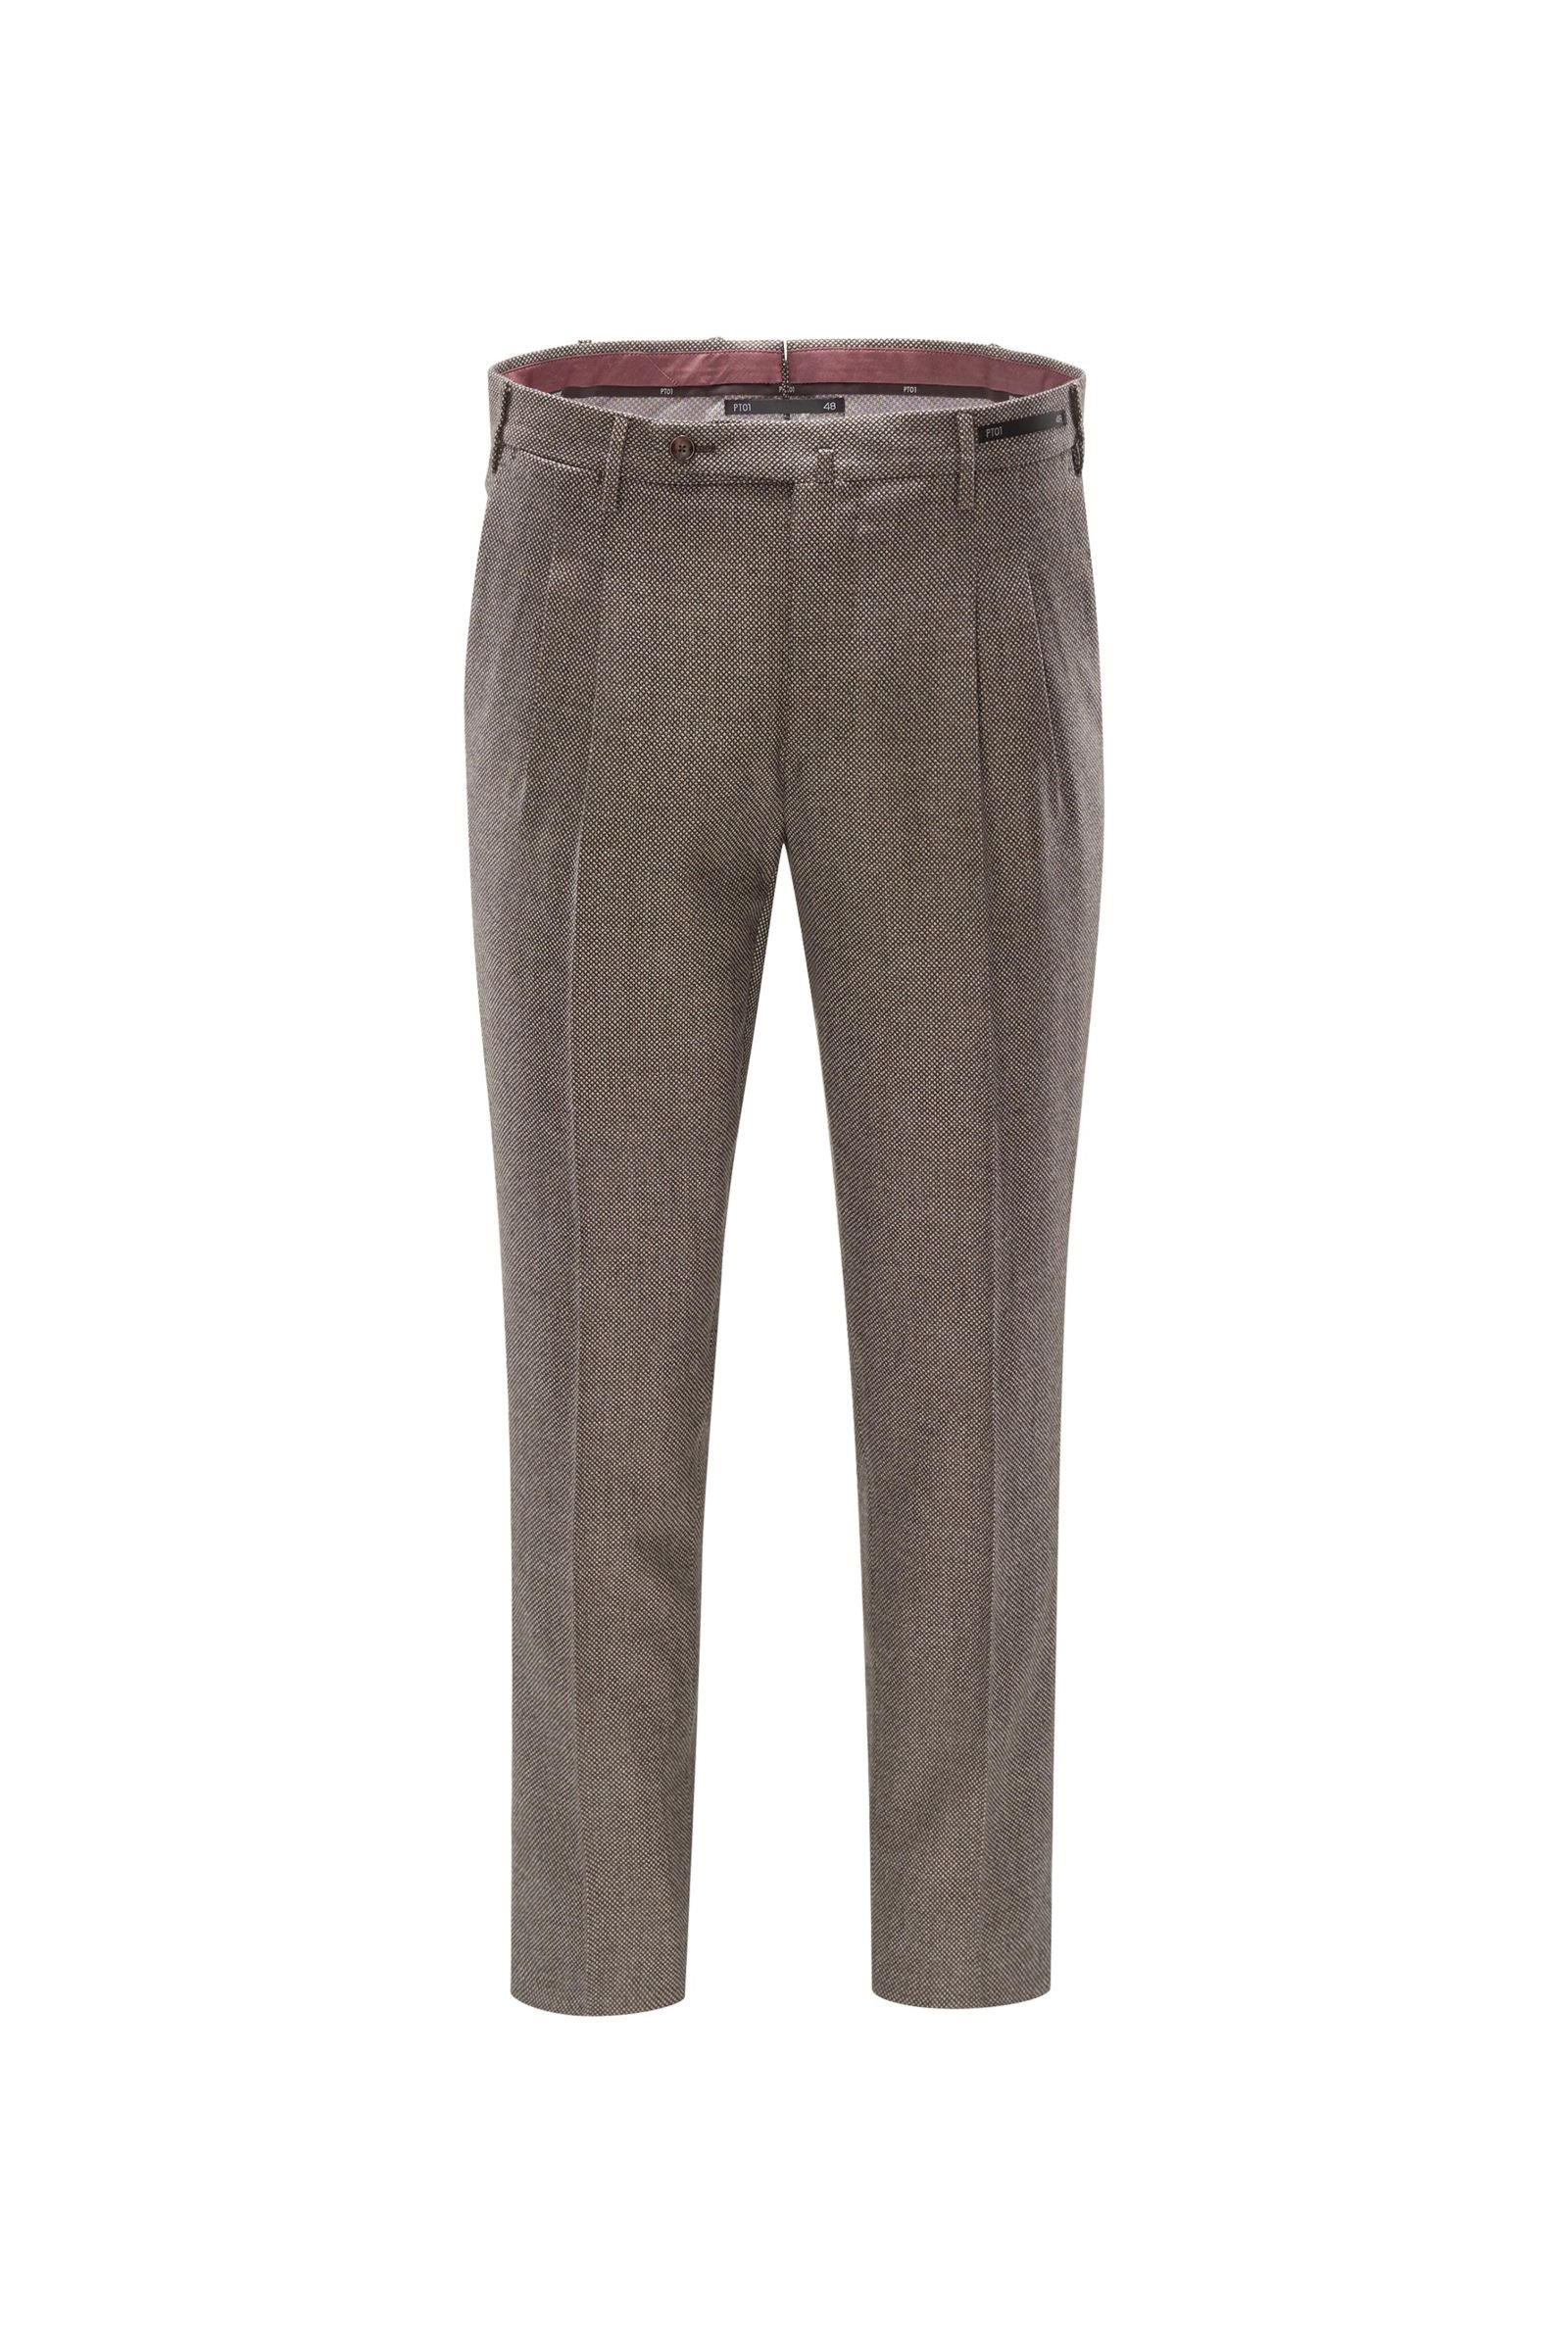 Wool trousers 'Preppy Fit' brown patterned